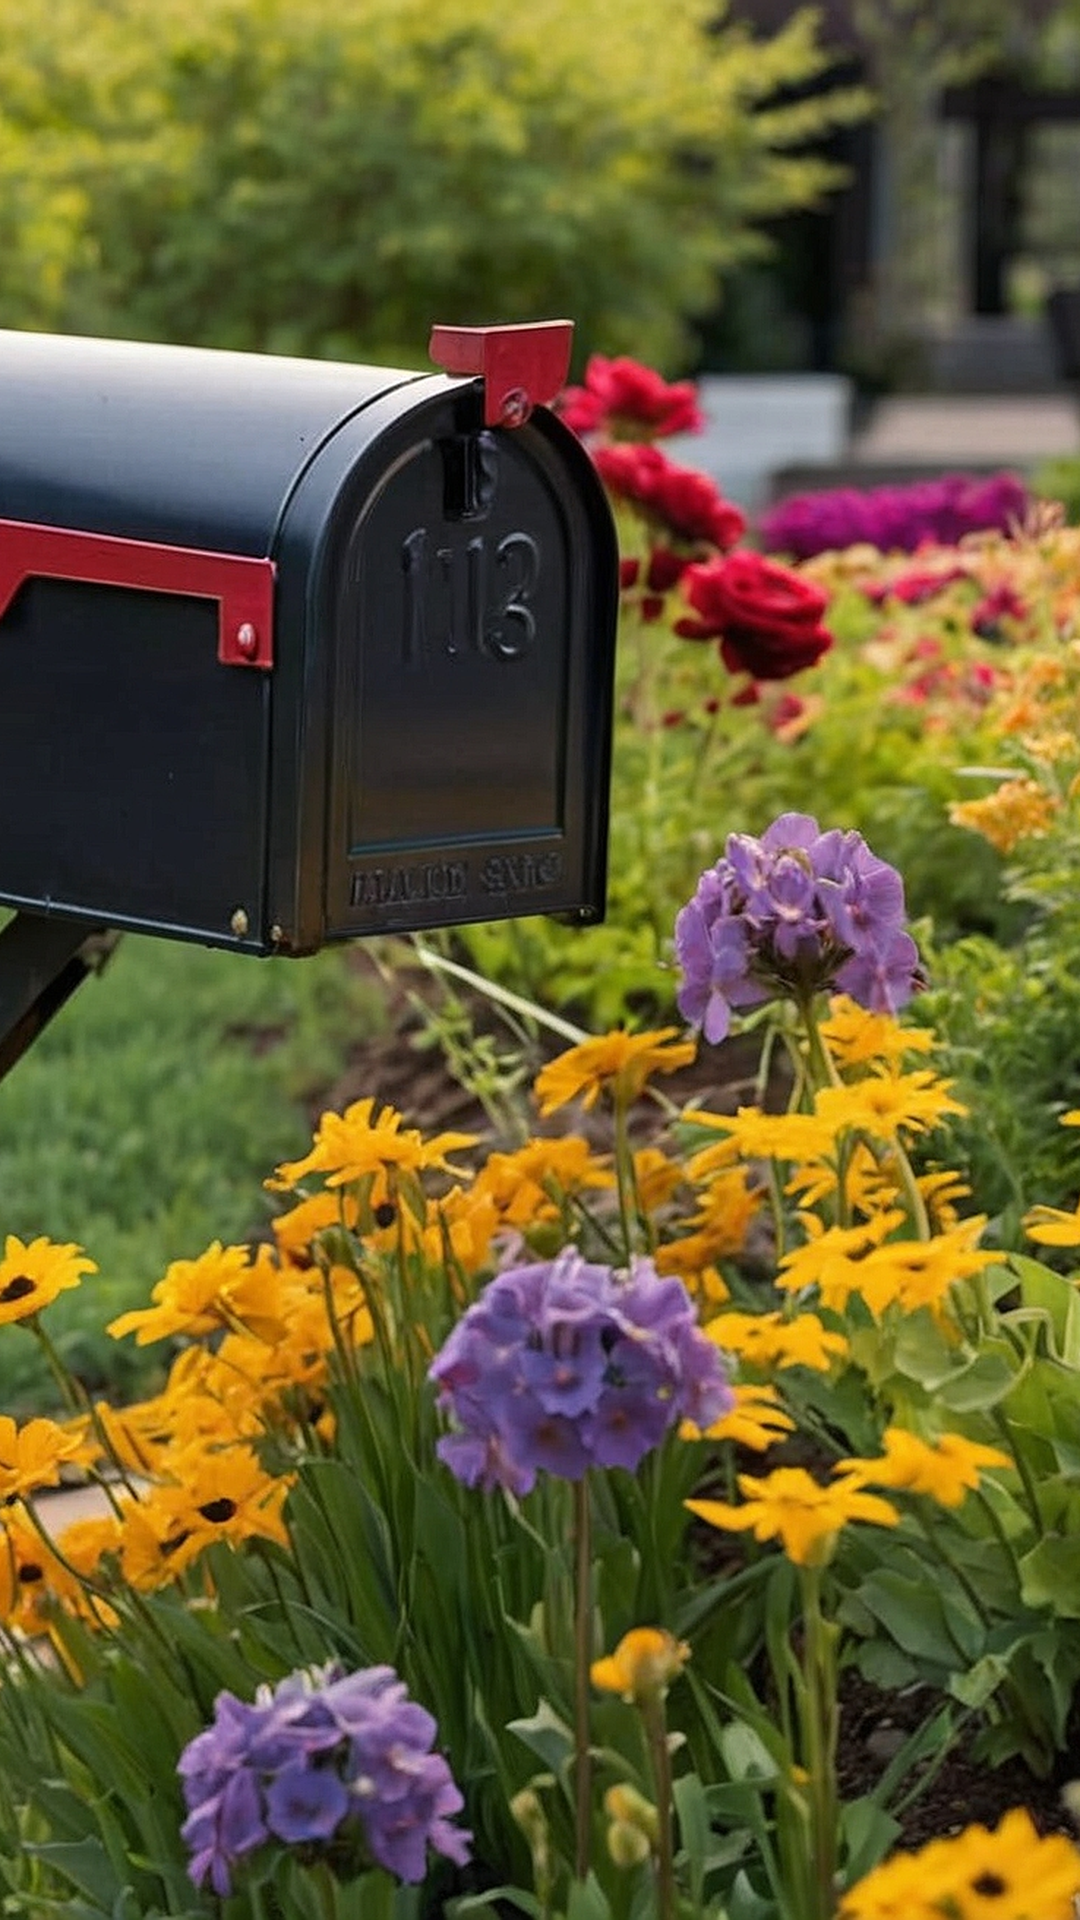 Floral Delights by the Mailbox: Captivating Garden Ideas